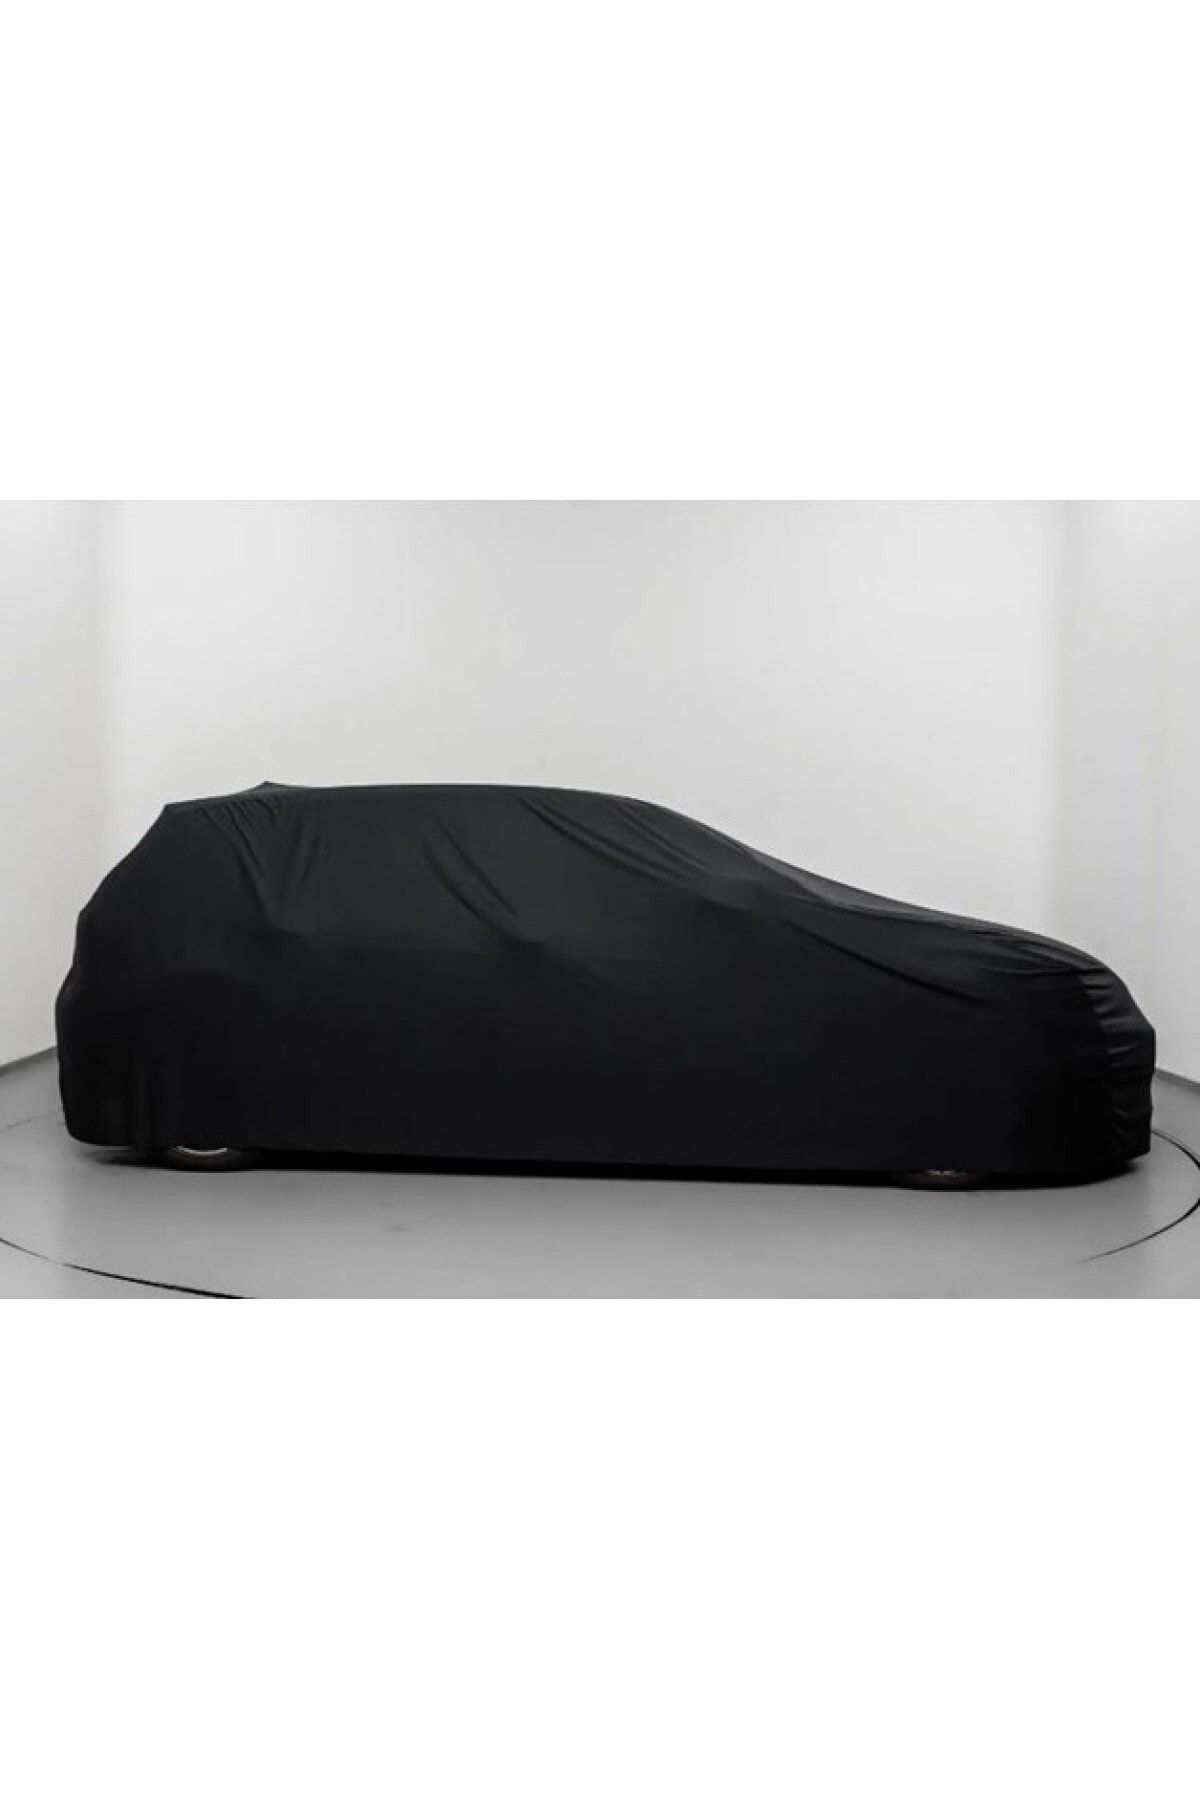 Teksin Nissan 370z Black Automobile Fabric Combed Cotton Car Cover with  Logo - Trendyol